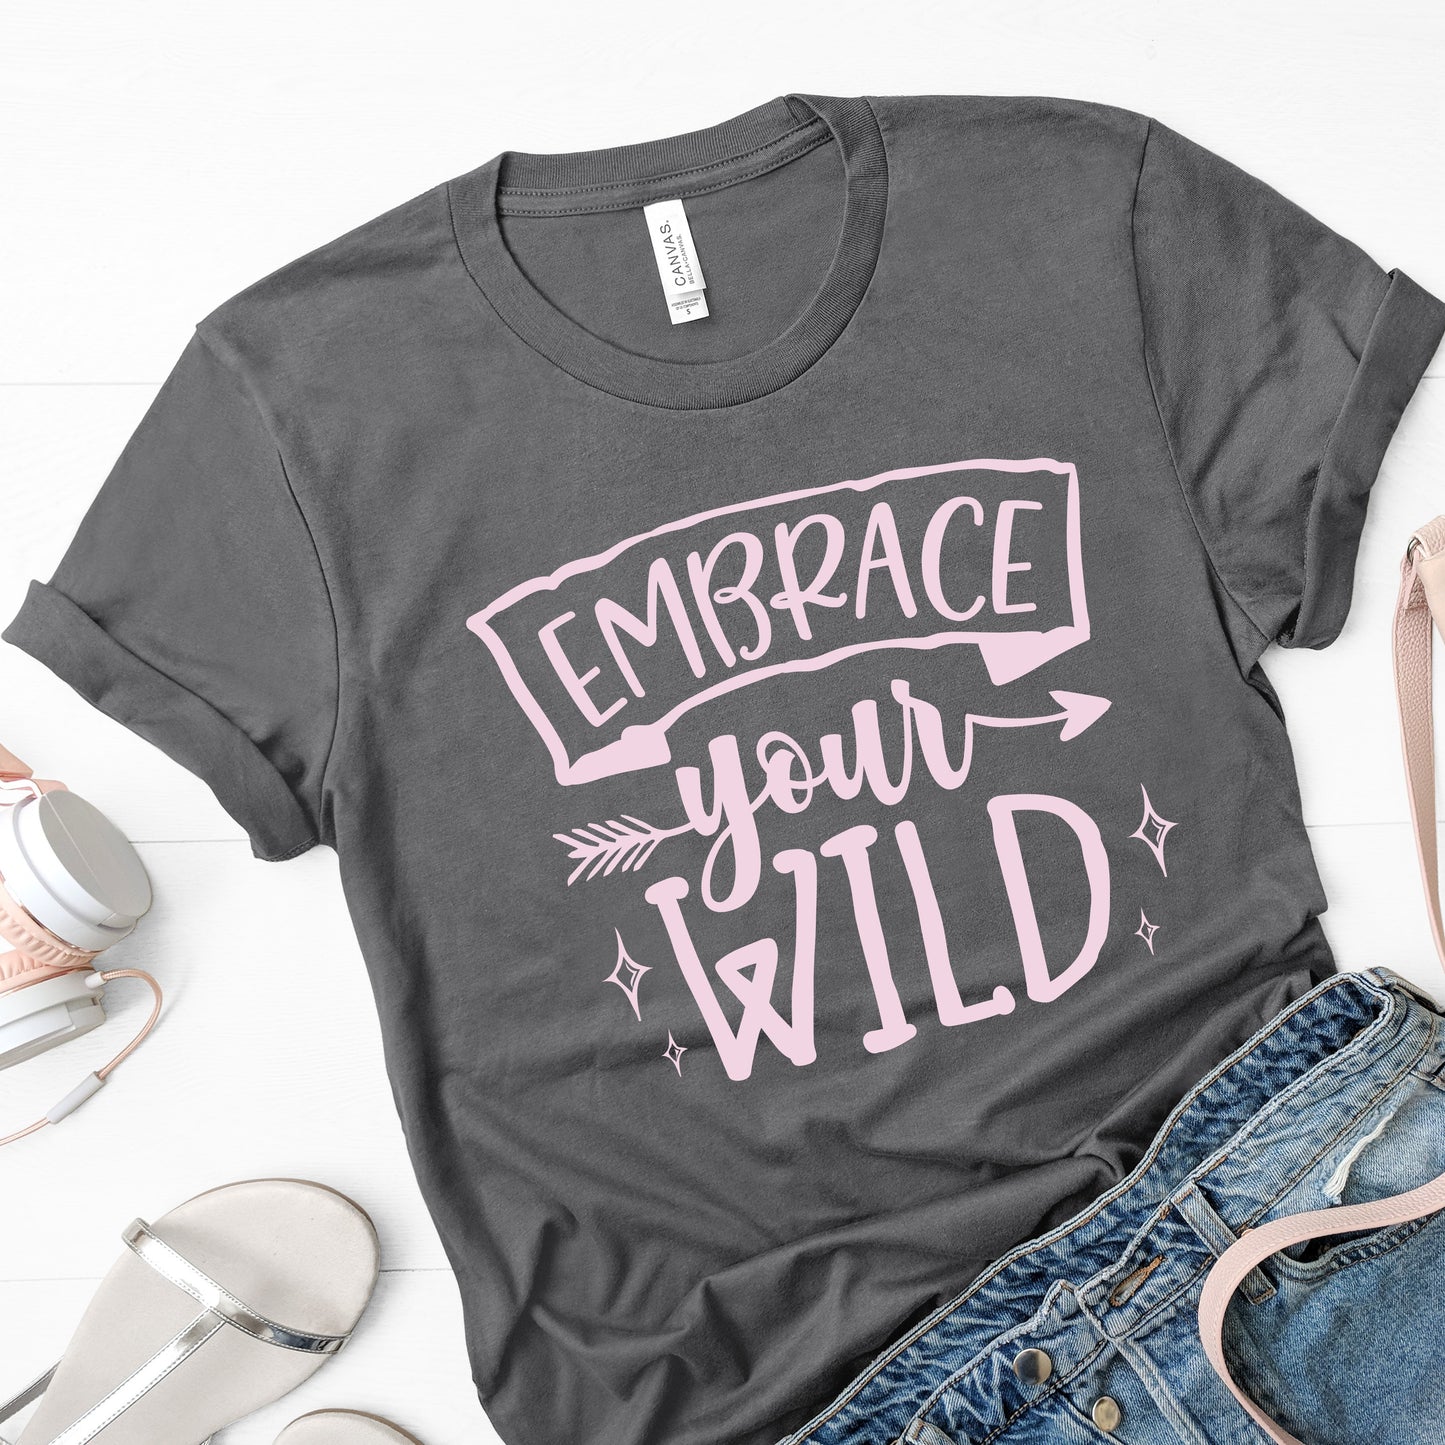 "Embrace your wild" Tee